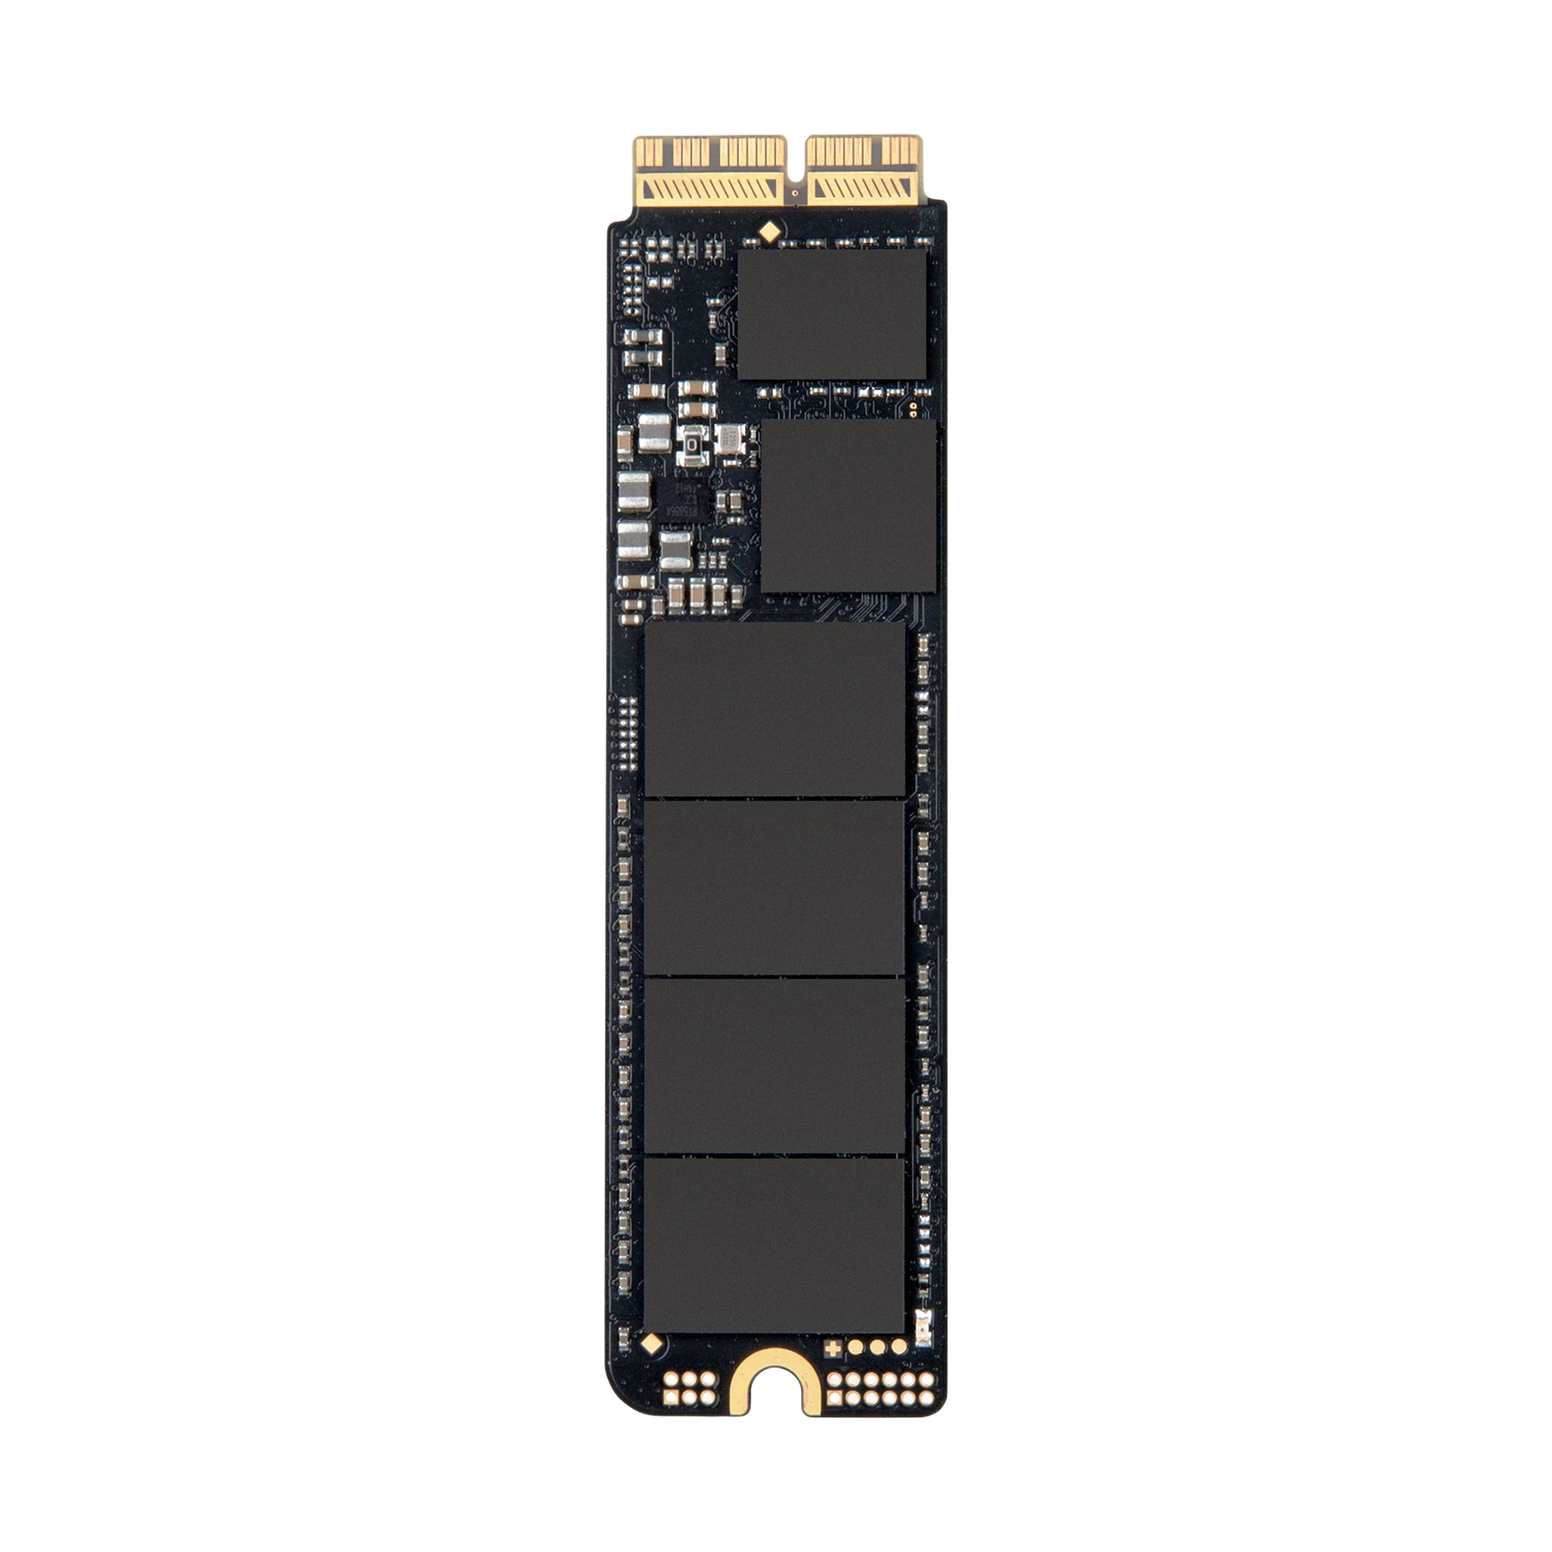 Transcend 960GB Jet Drive 820 SSD Only for MacBook Pro (Late 2013 - Early 2015), MacBook Air (Mid 2013 - Early 2015), Mac mini (Late 2014), Mac Pro (Late 2013) - AHCI Gen3 x2 - Discontinued